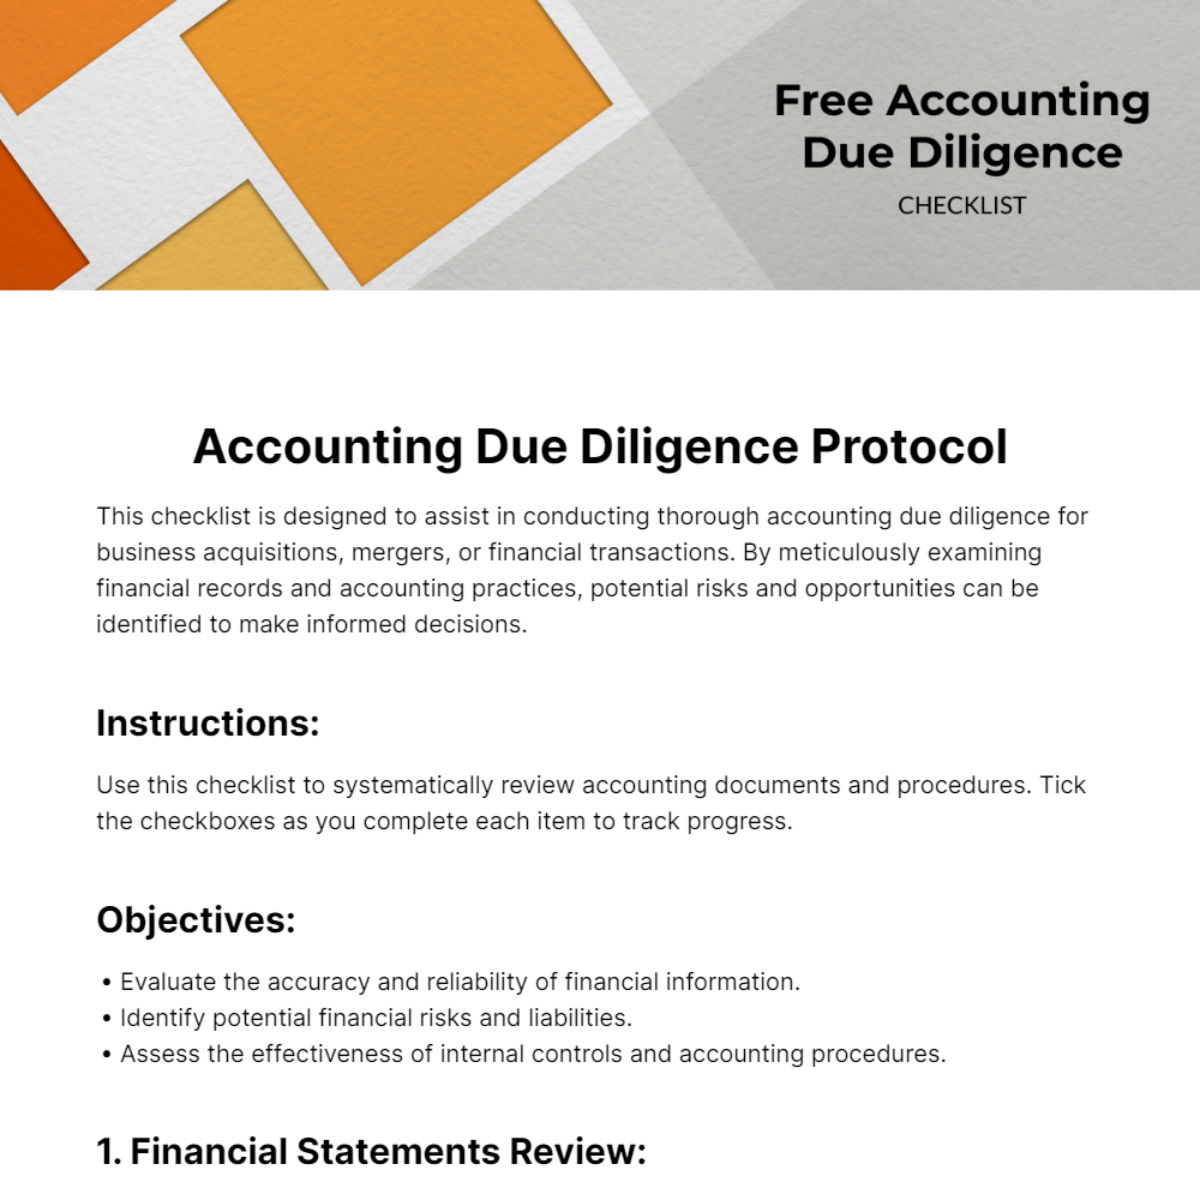 Free Accounting Due Diligence Checklist Template